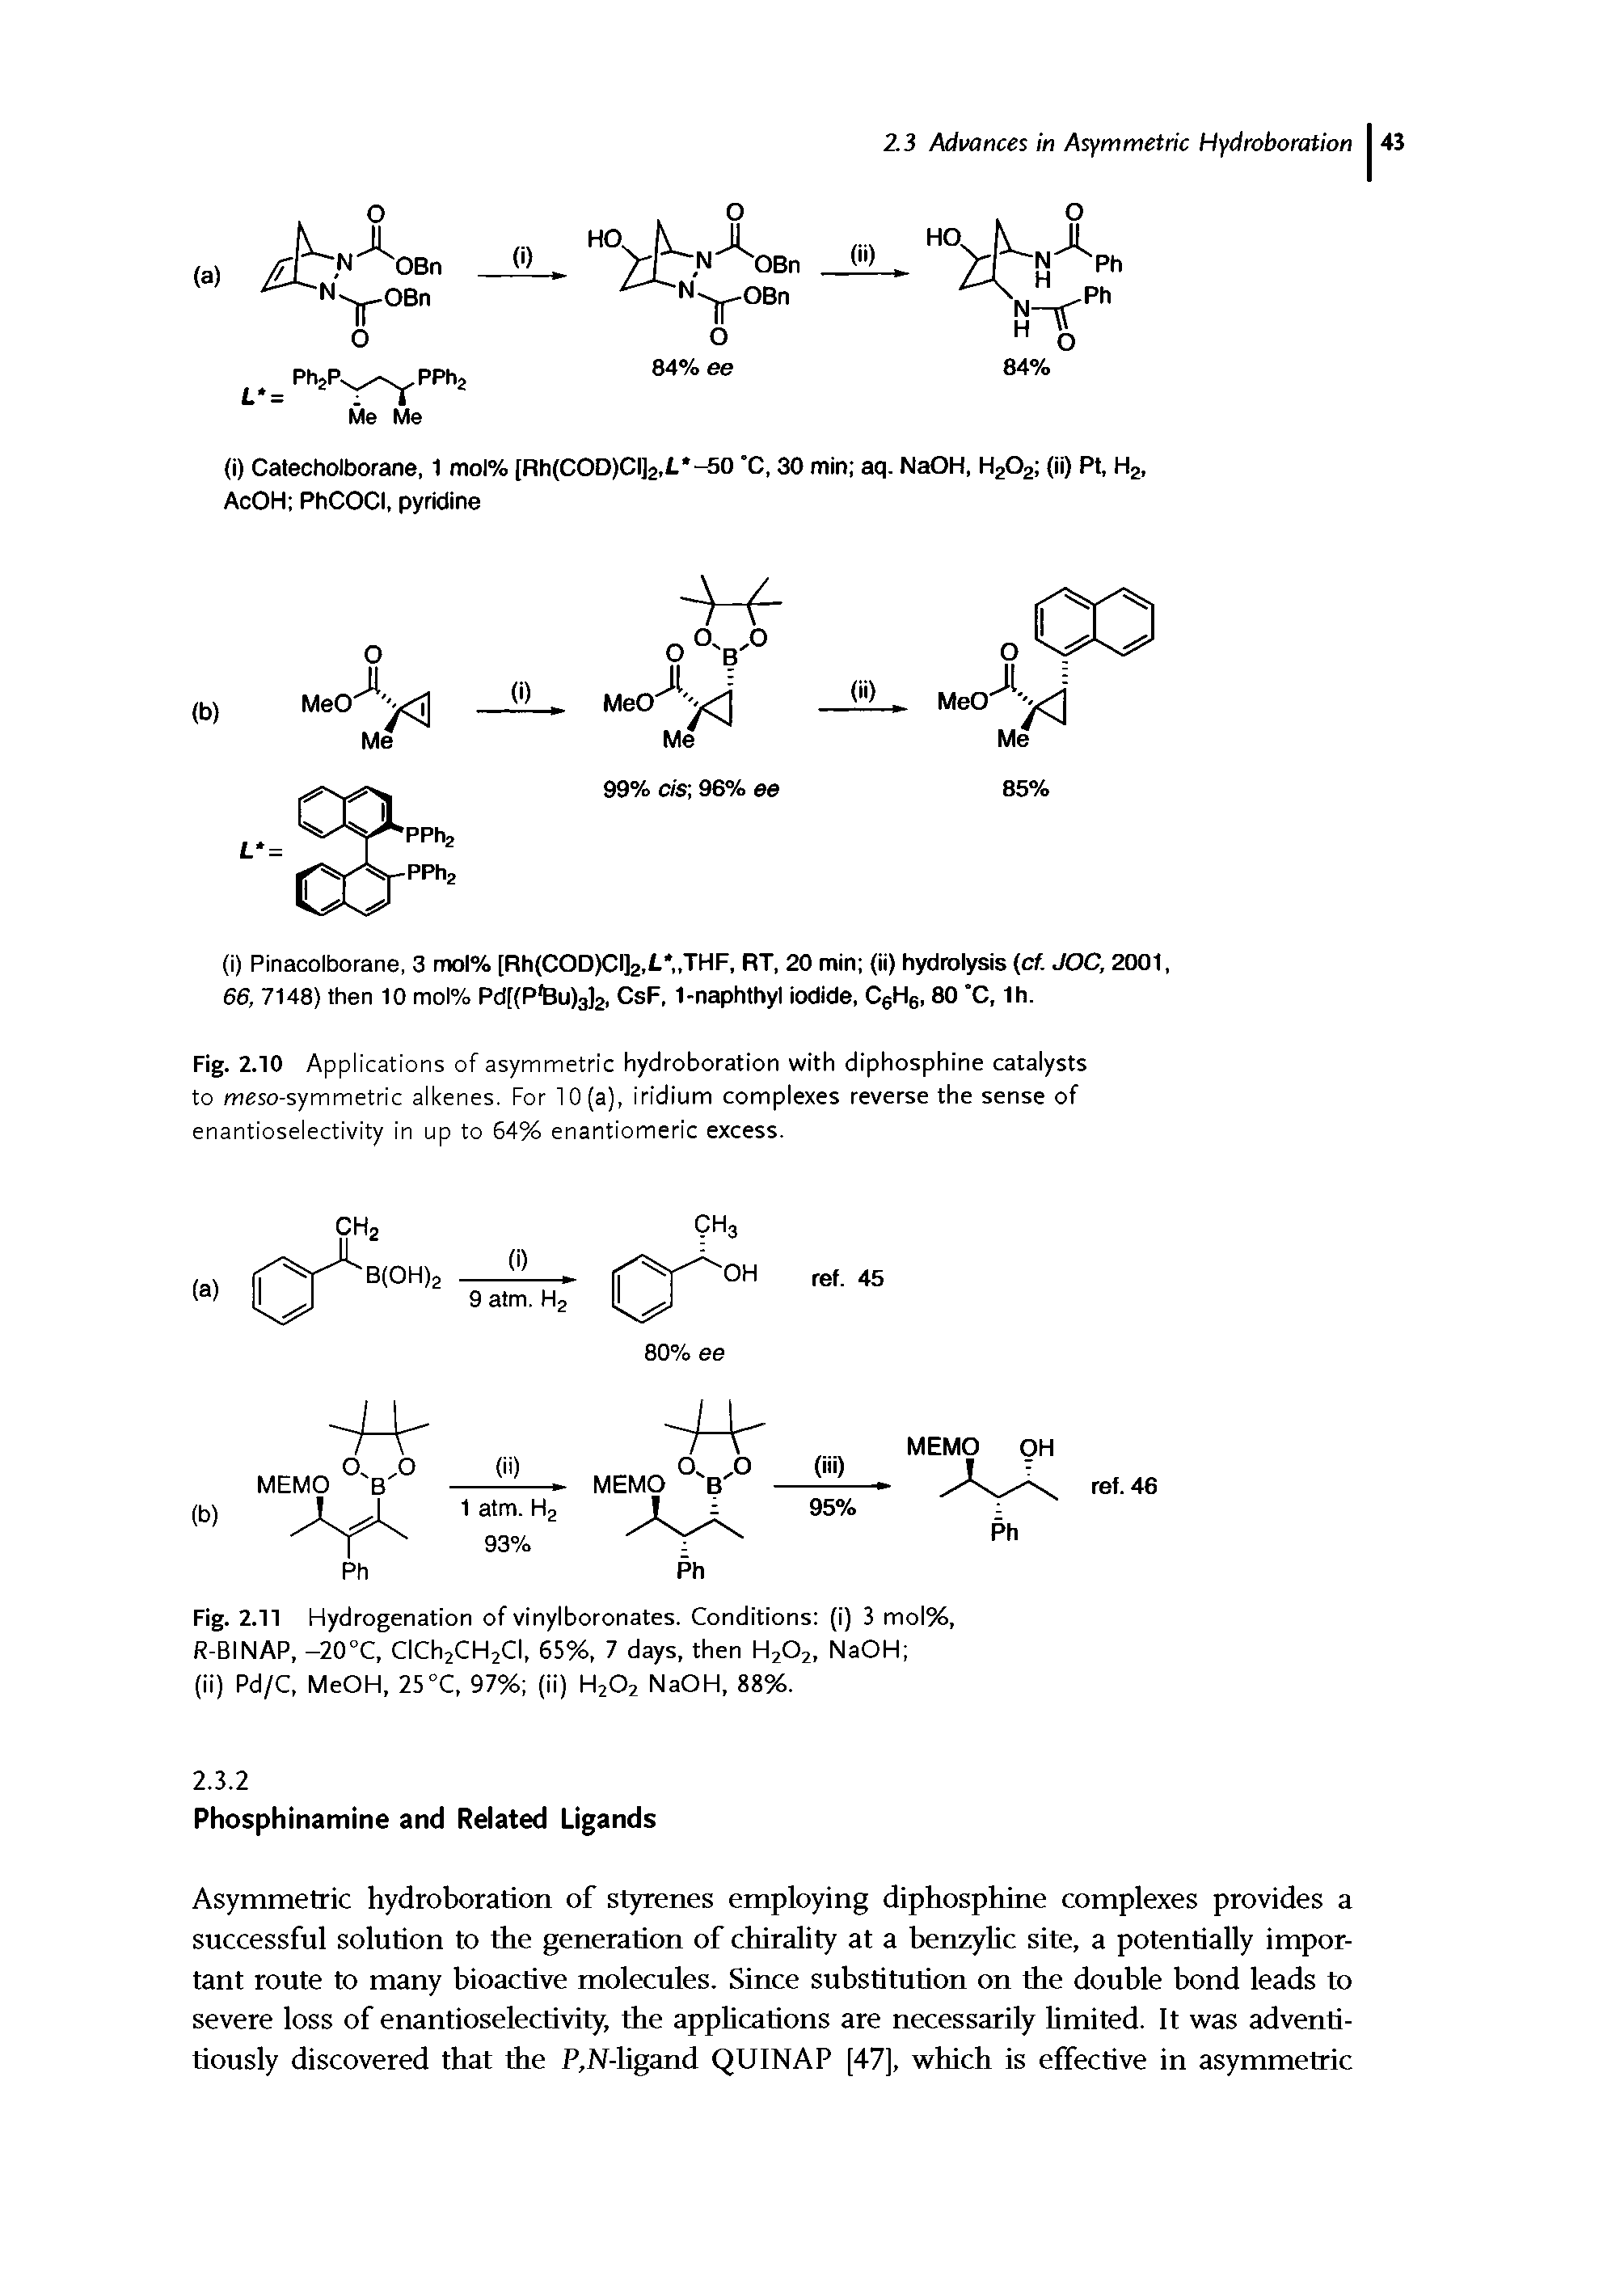 Fig. 2.10 Applications of asymmetric hydroboration with diphosphine catalysts to meso-symmetric alkenes. For 10(a), iridium complexes reverse the sense of enantioselectivity in up to 54% enantiomeric excess.